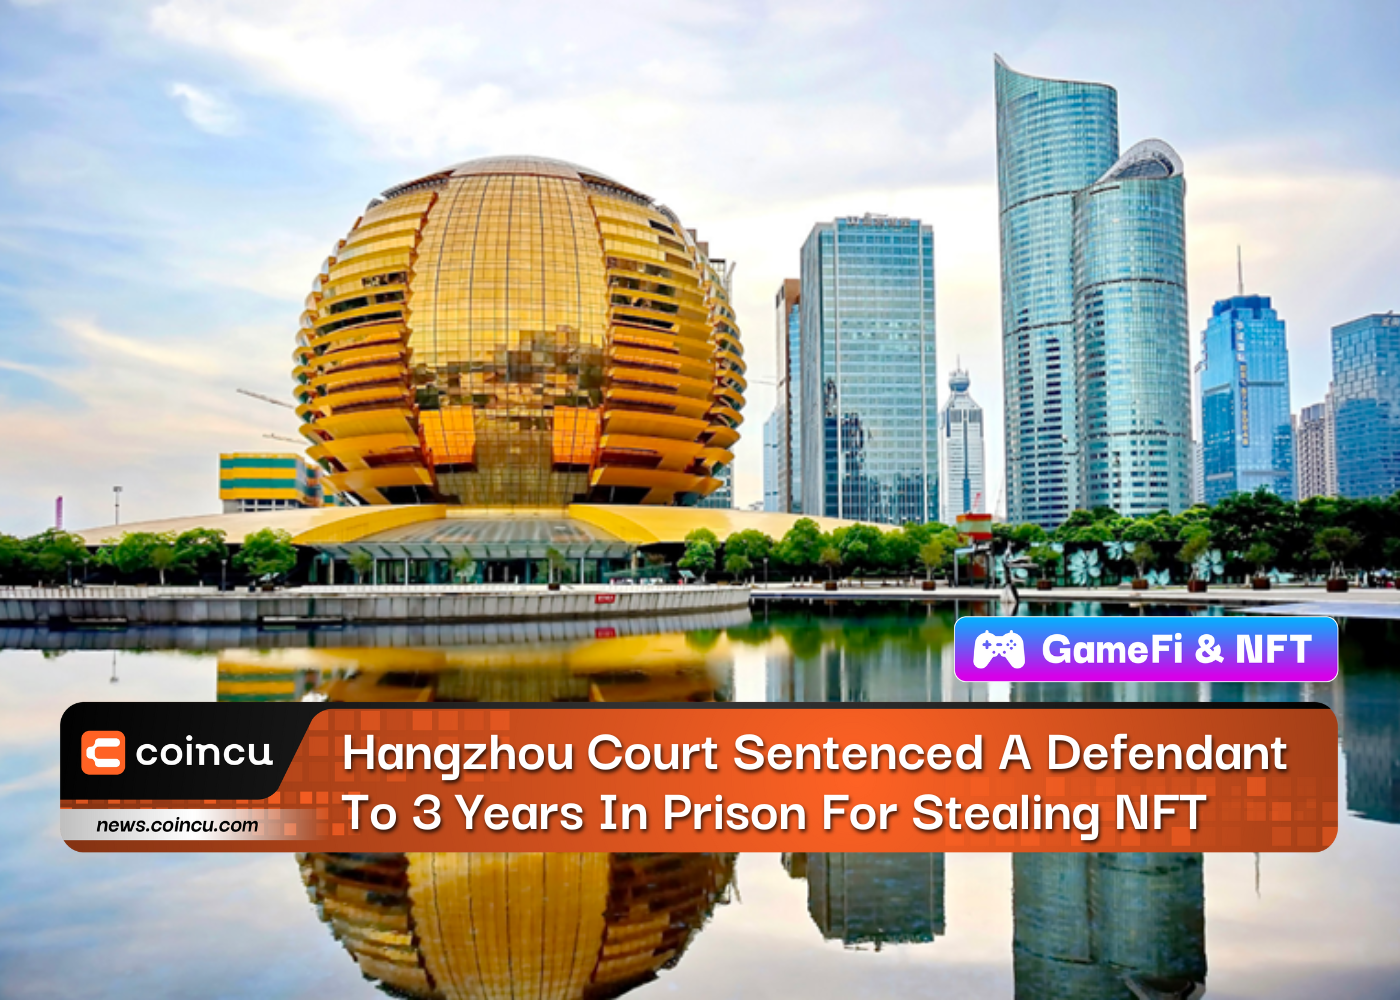 Hangzhou Court Sentenced A Defendant To 3 Years In Prison For Stealing NFT